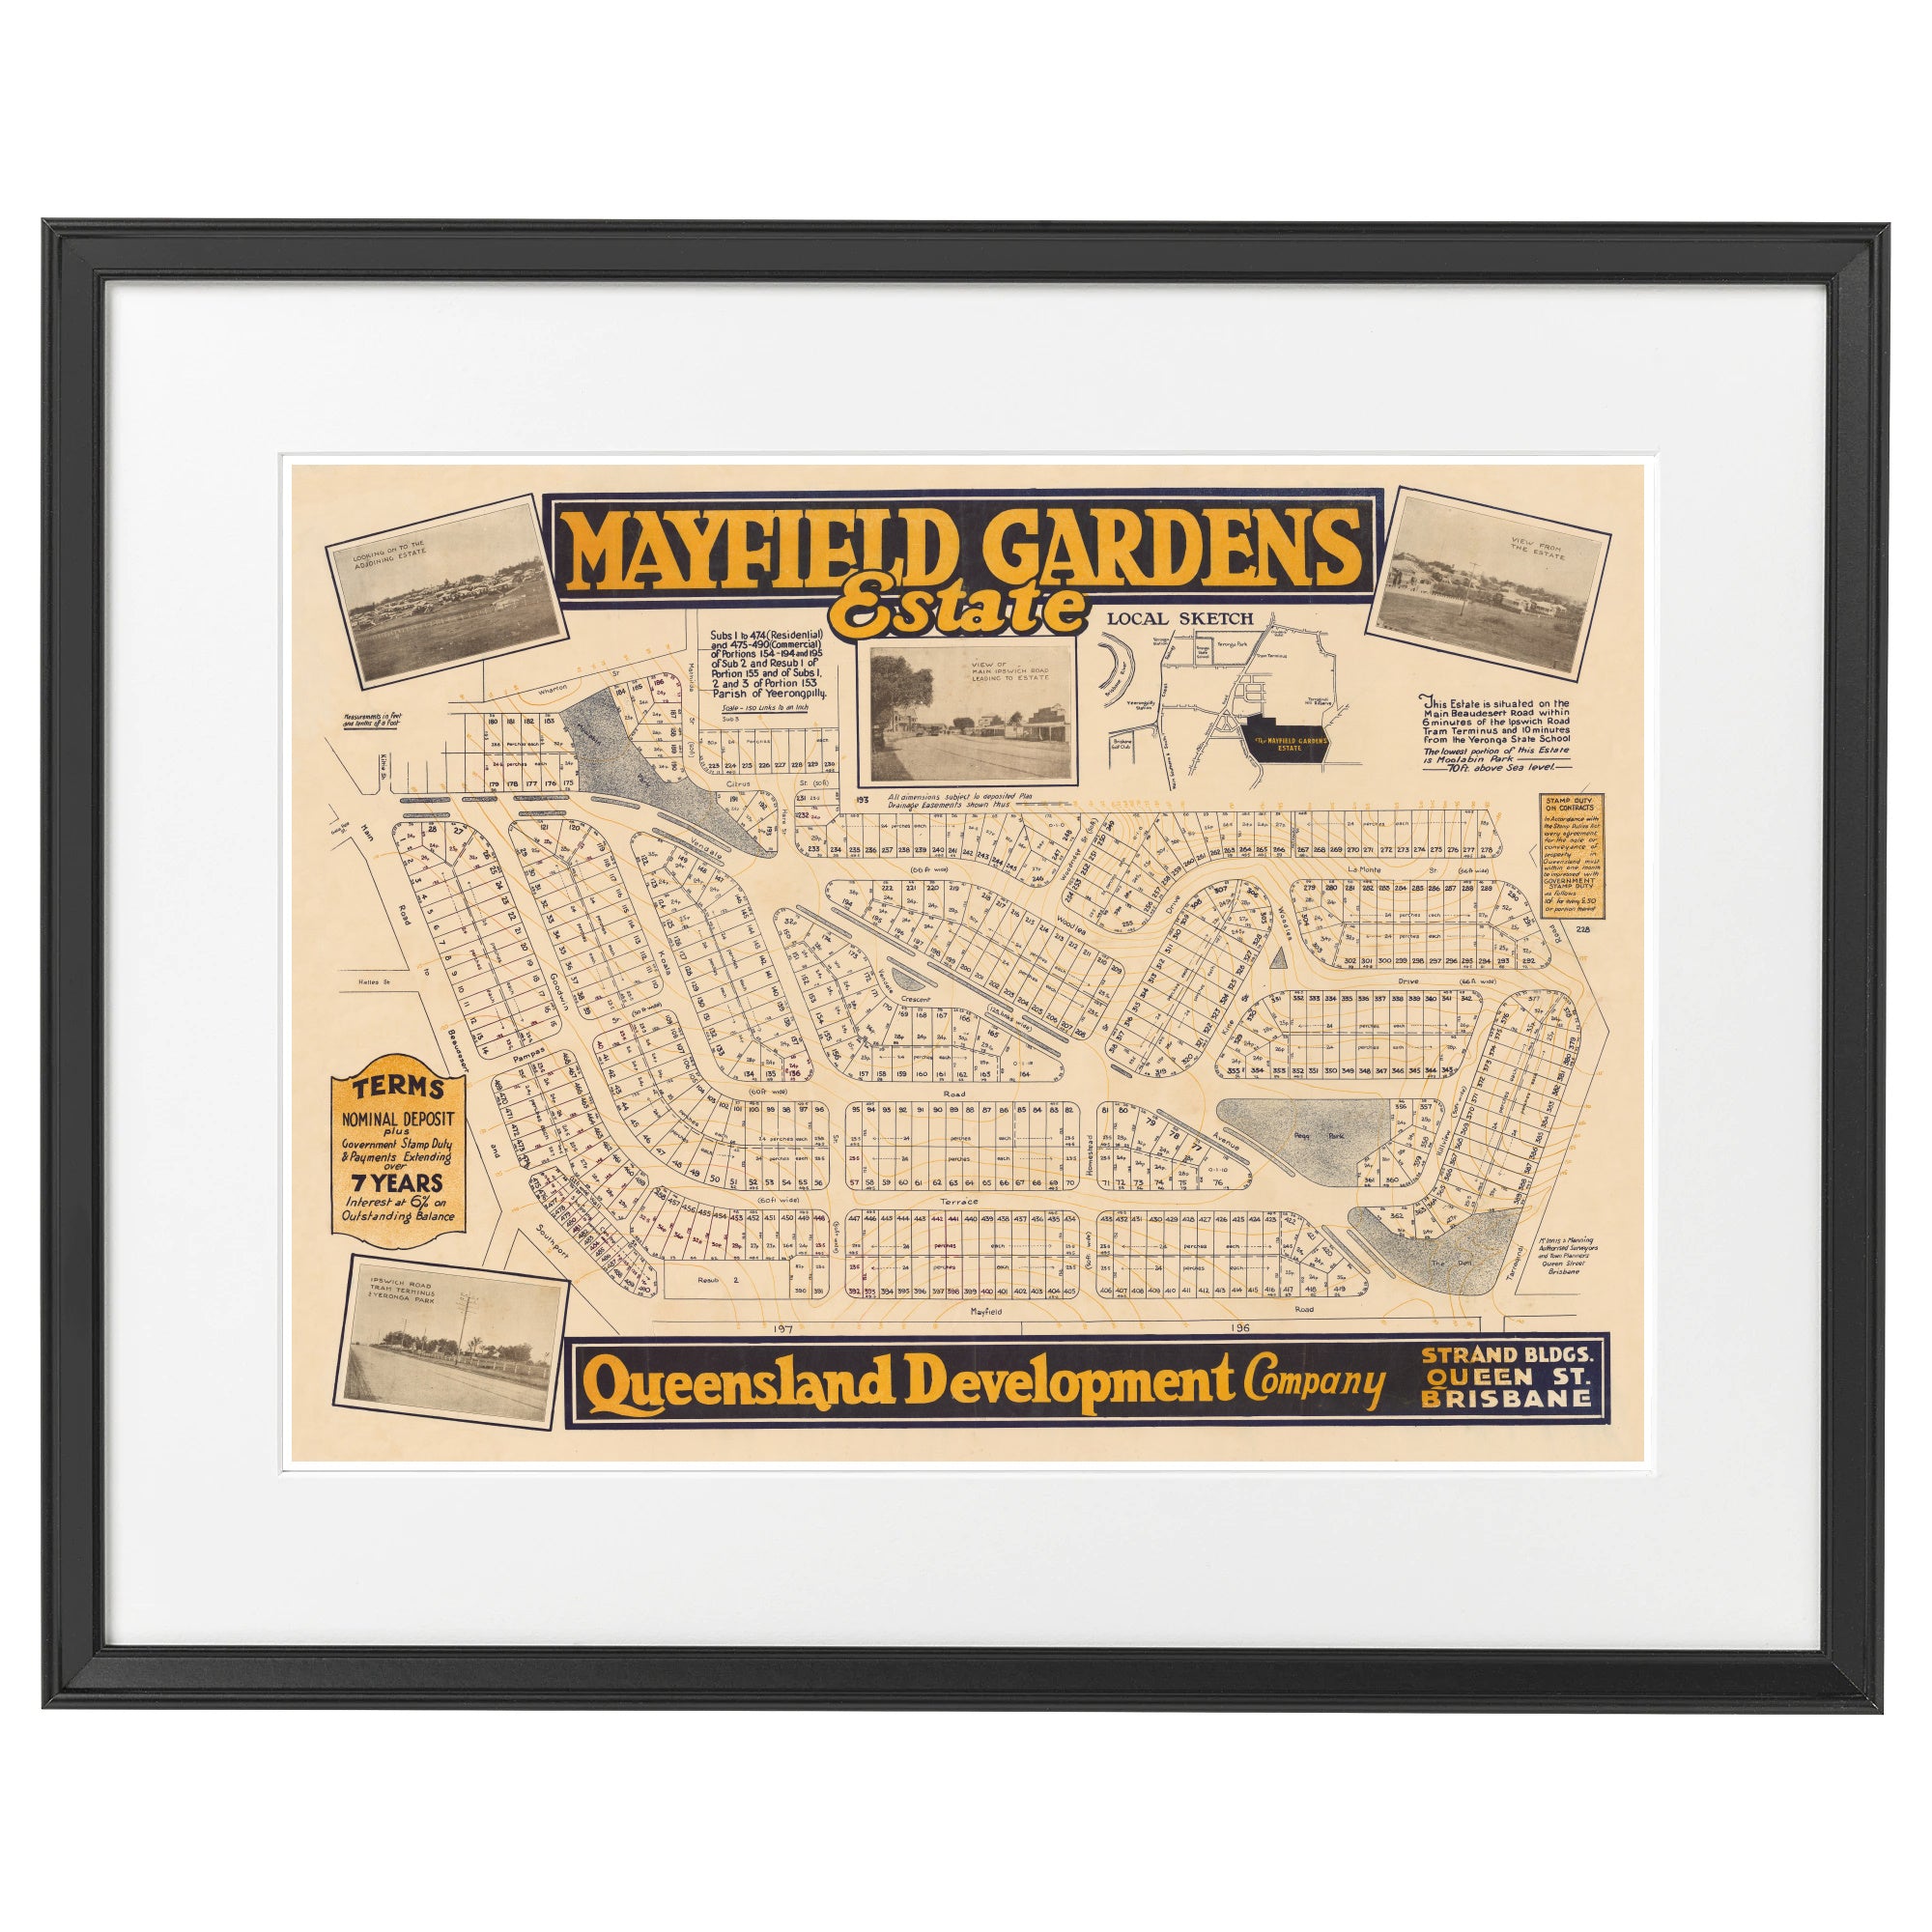 1927 Mayfield Gardens Estate - 94 years ago today